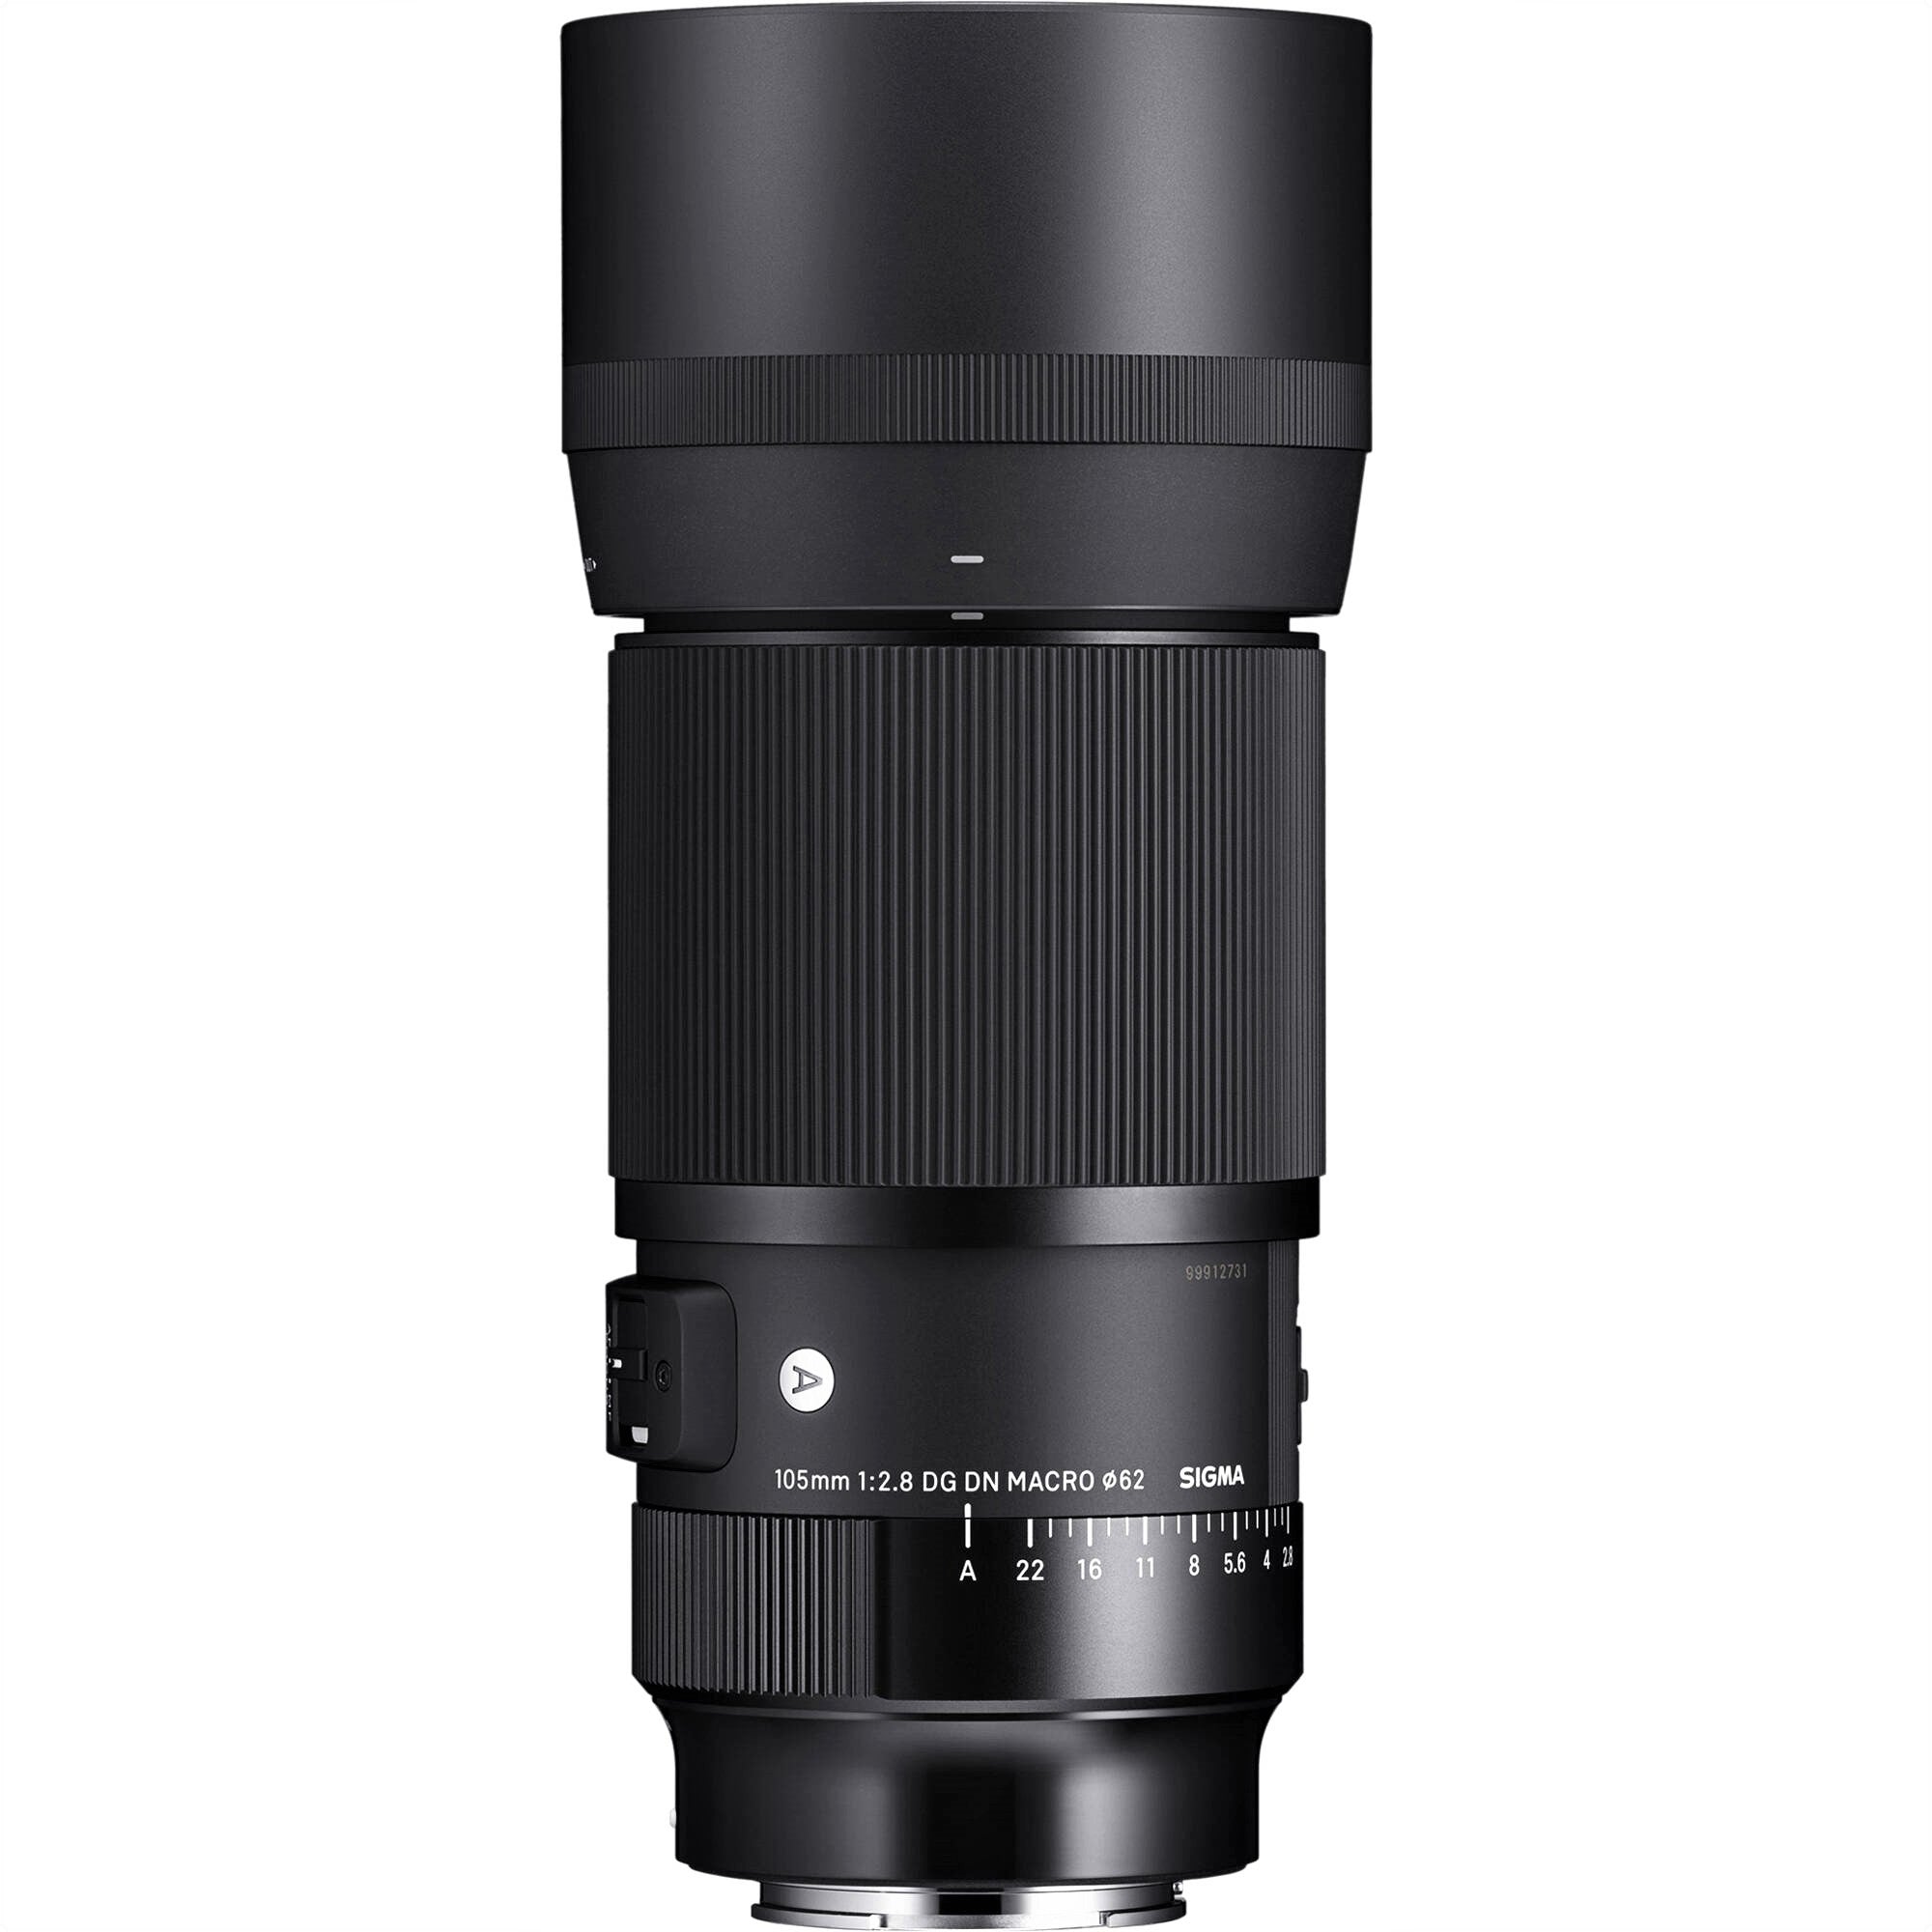 Sigma 105mm F2.8 DG DN Macro Art Lens for Sony E with Attached Lens Hood on the Top